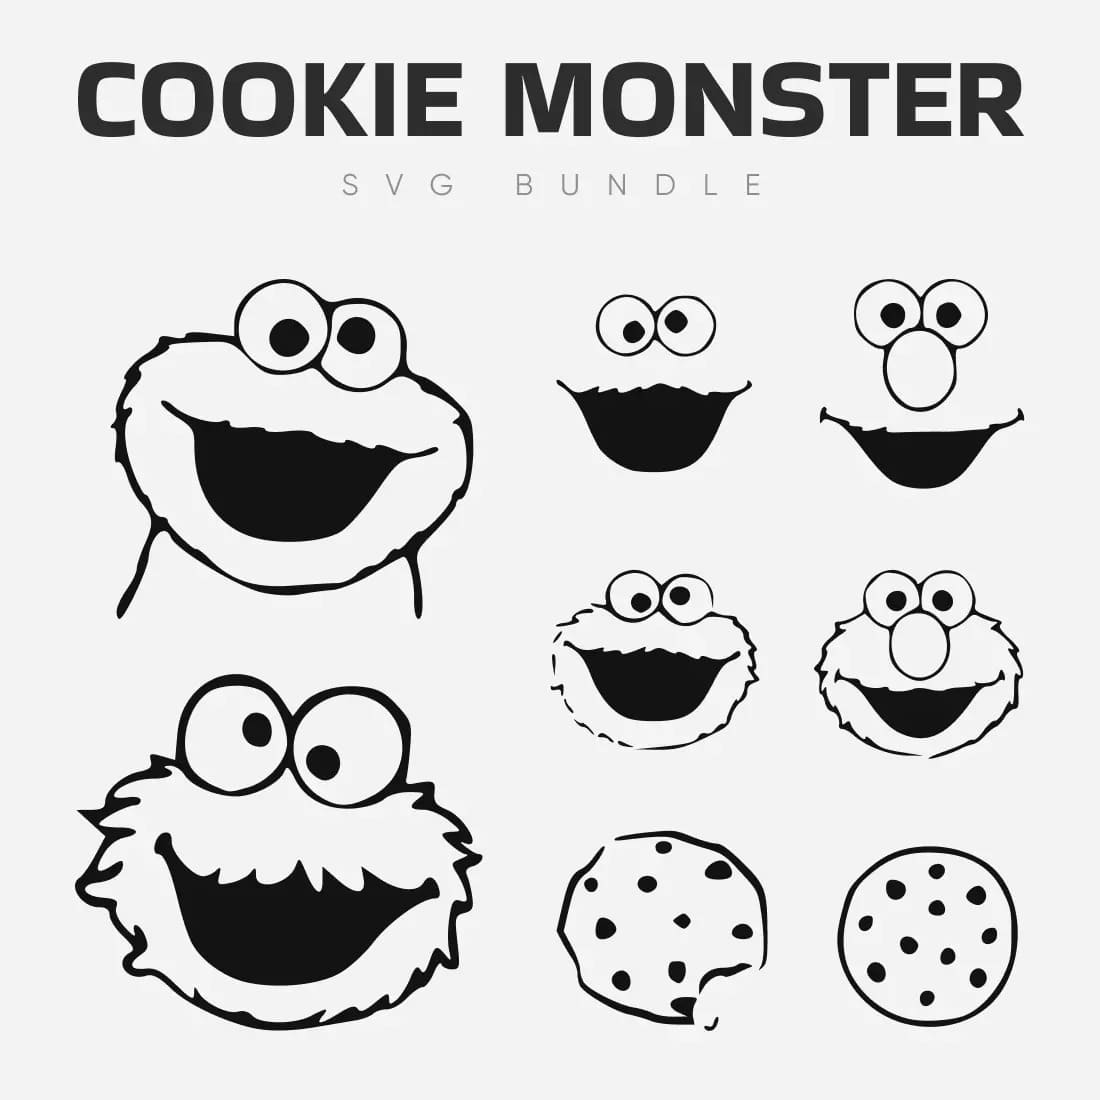 Cookie Monster SVG Bundle Preview 6.